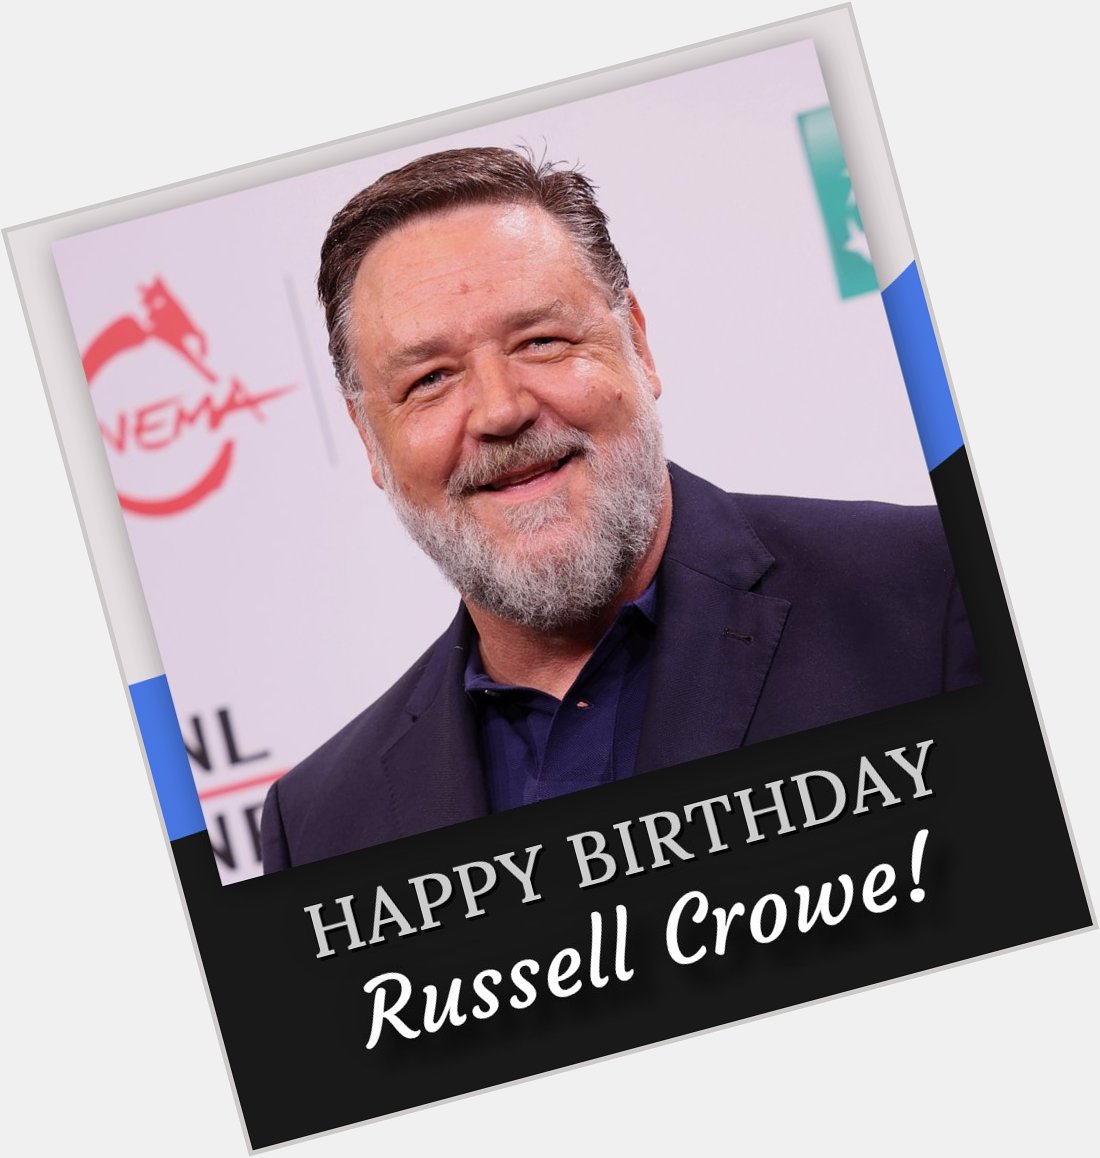 Happy birthday, Russell Crowe! 